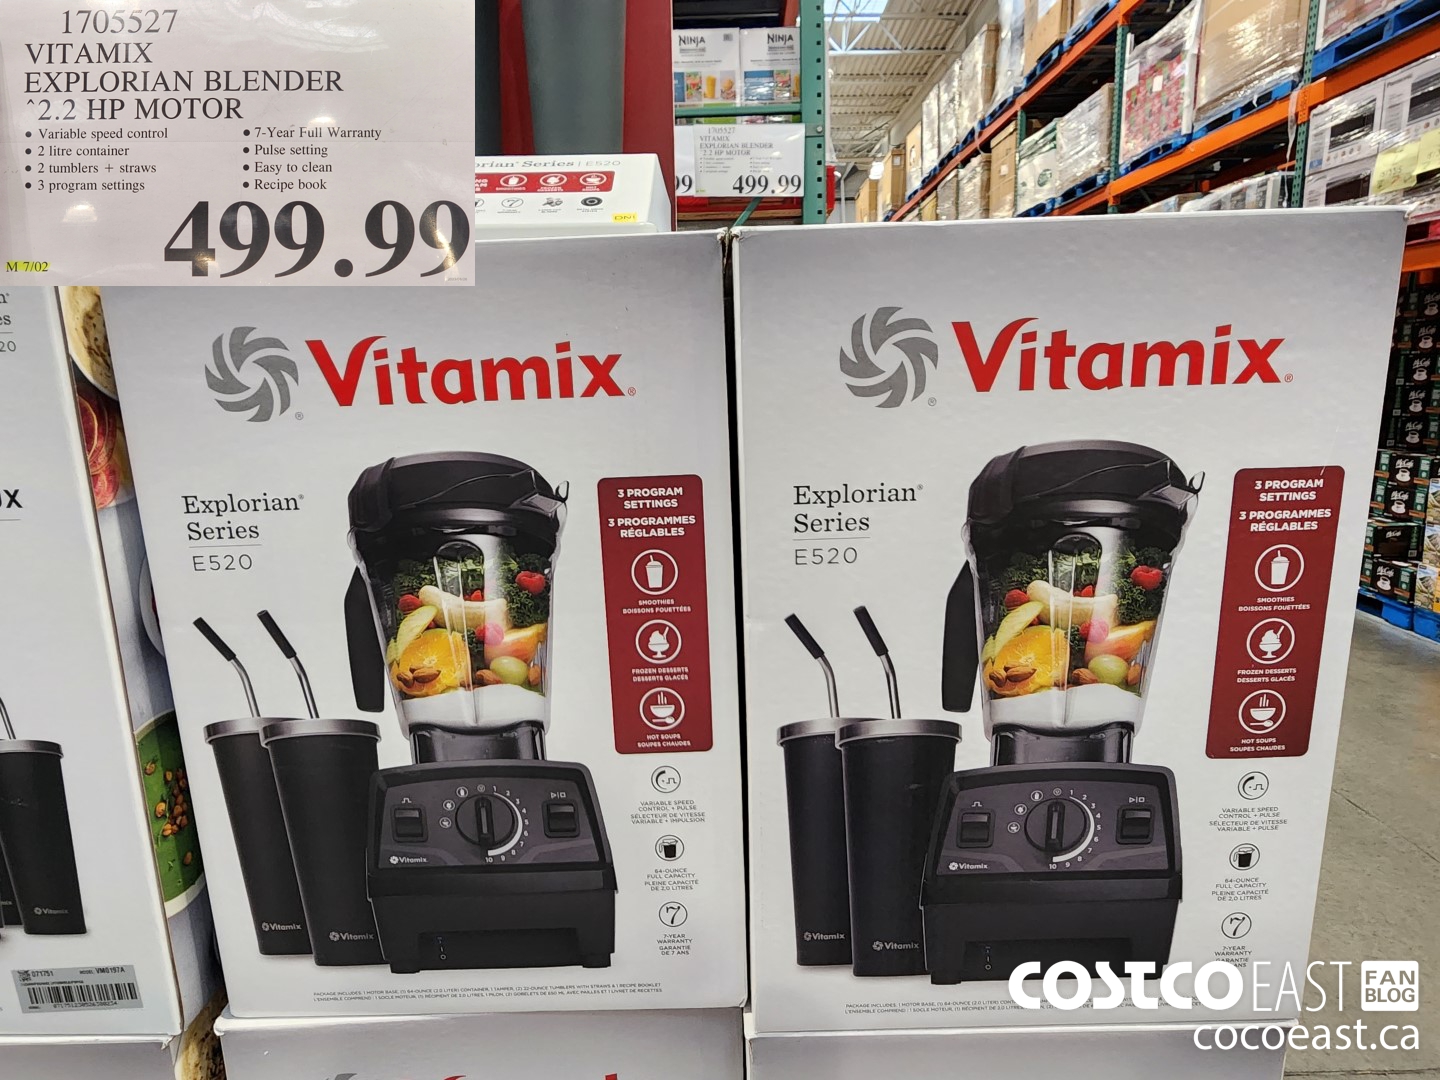 Looking for the Bosch Mixer at Costco? ~ The best deal since 2015!